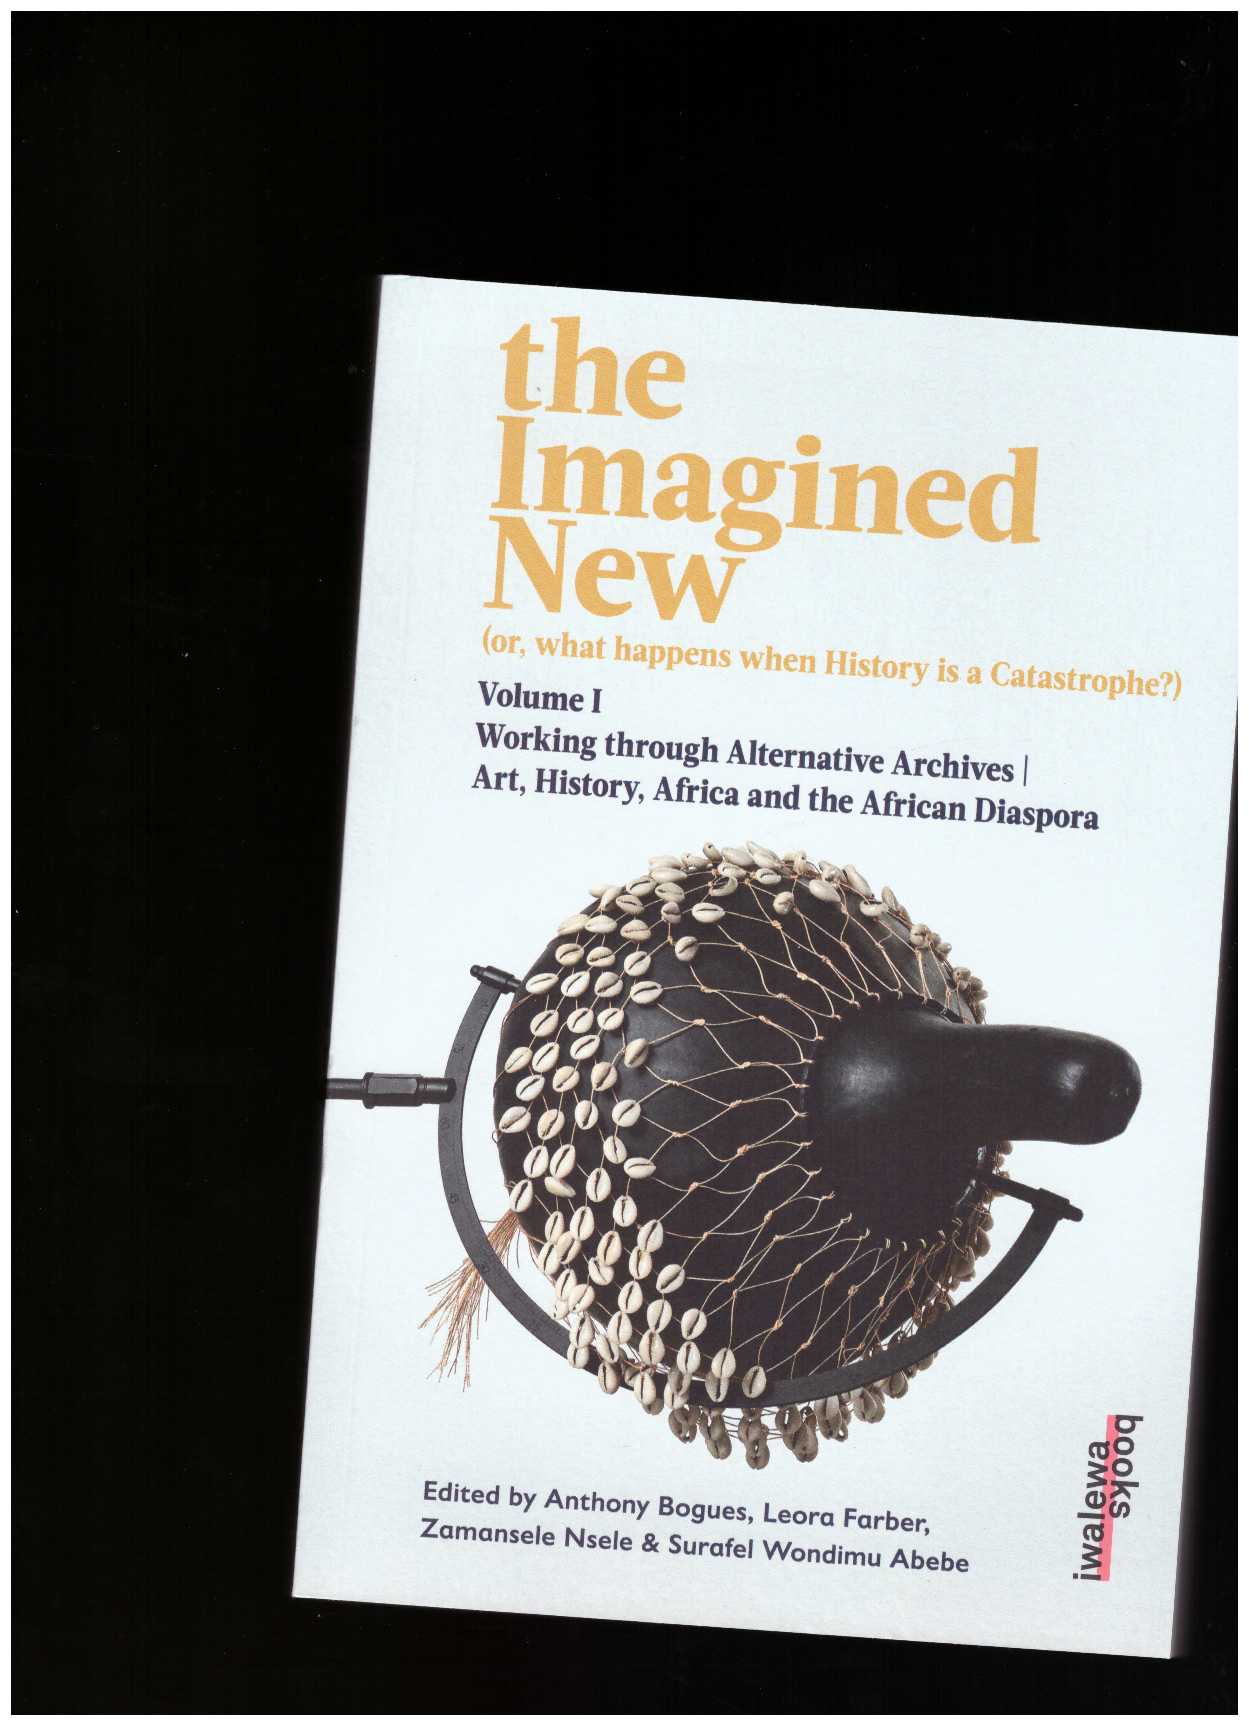 BOGUES, Anthony; FARBER, Leora; NSELE, Zamansele; WONDIMU ABEBE, Surafel (eds.) - the Imagined New. (or, what happens when History is a Catastrophe?) - Volume I: Working through Alternative Archives